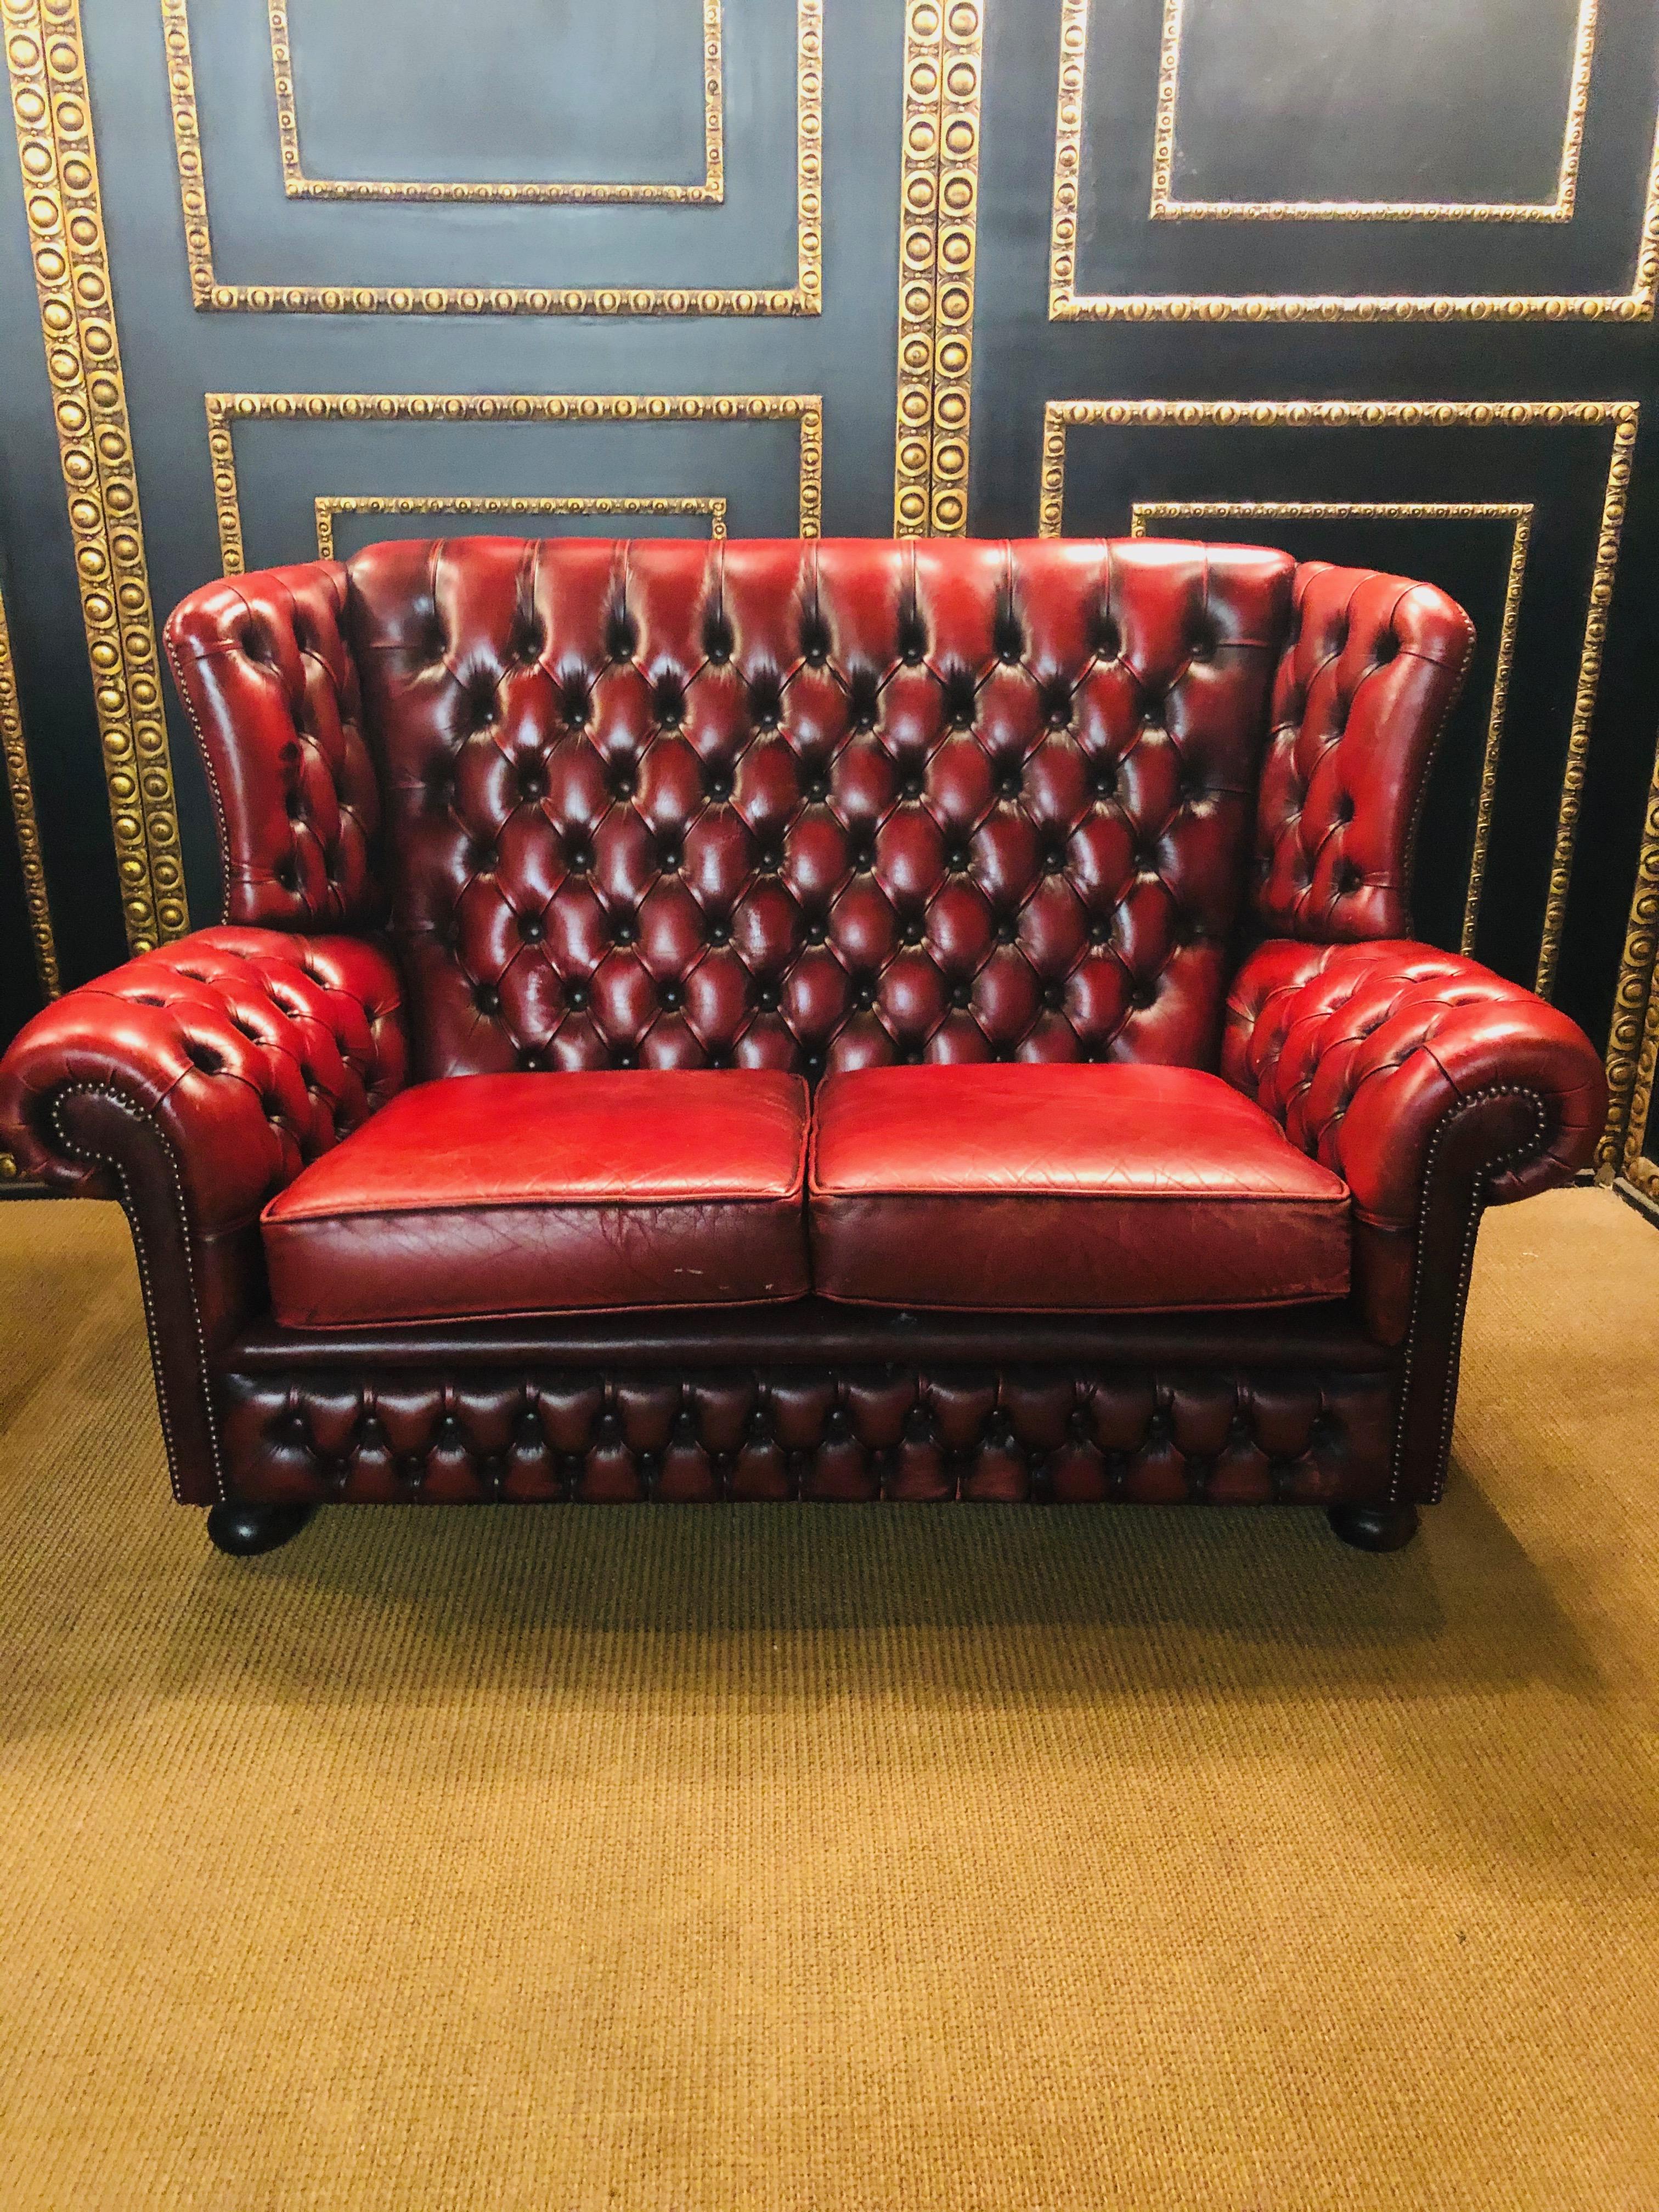 Beautifully aged English Chesterfield wingback seater or sofa. Featuring a tufted cordovan leather upholstery English rolled arms.
 